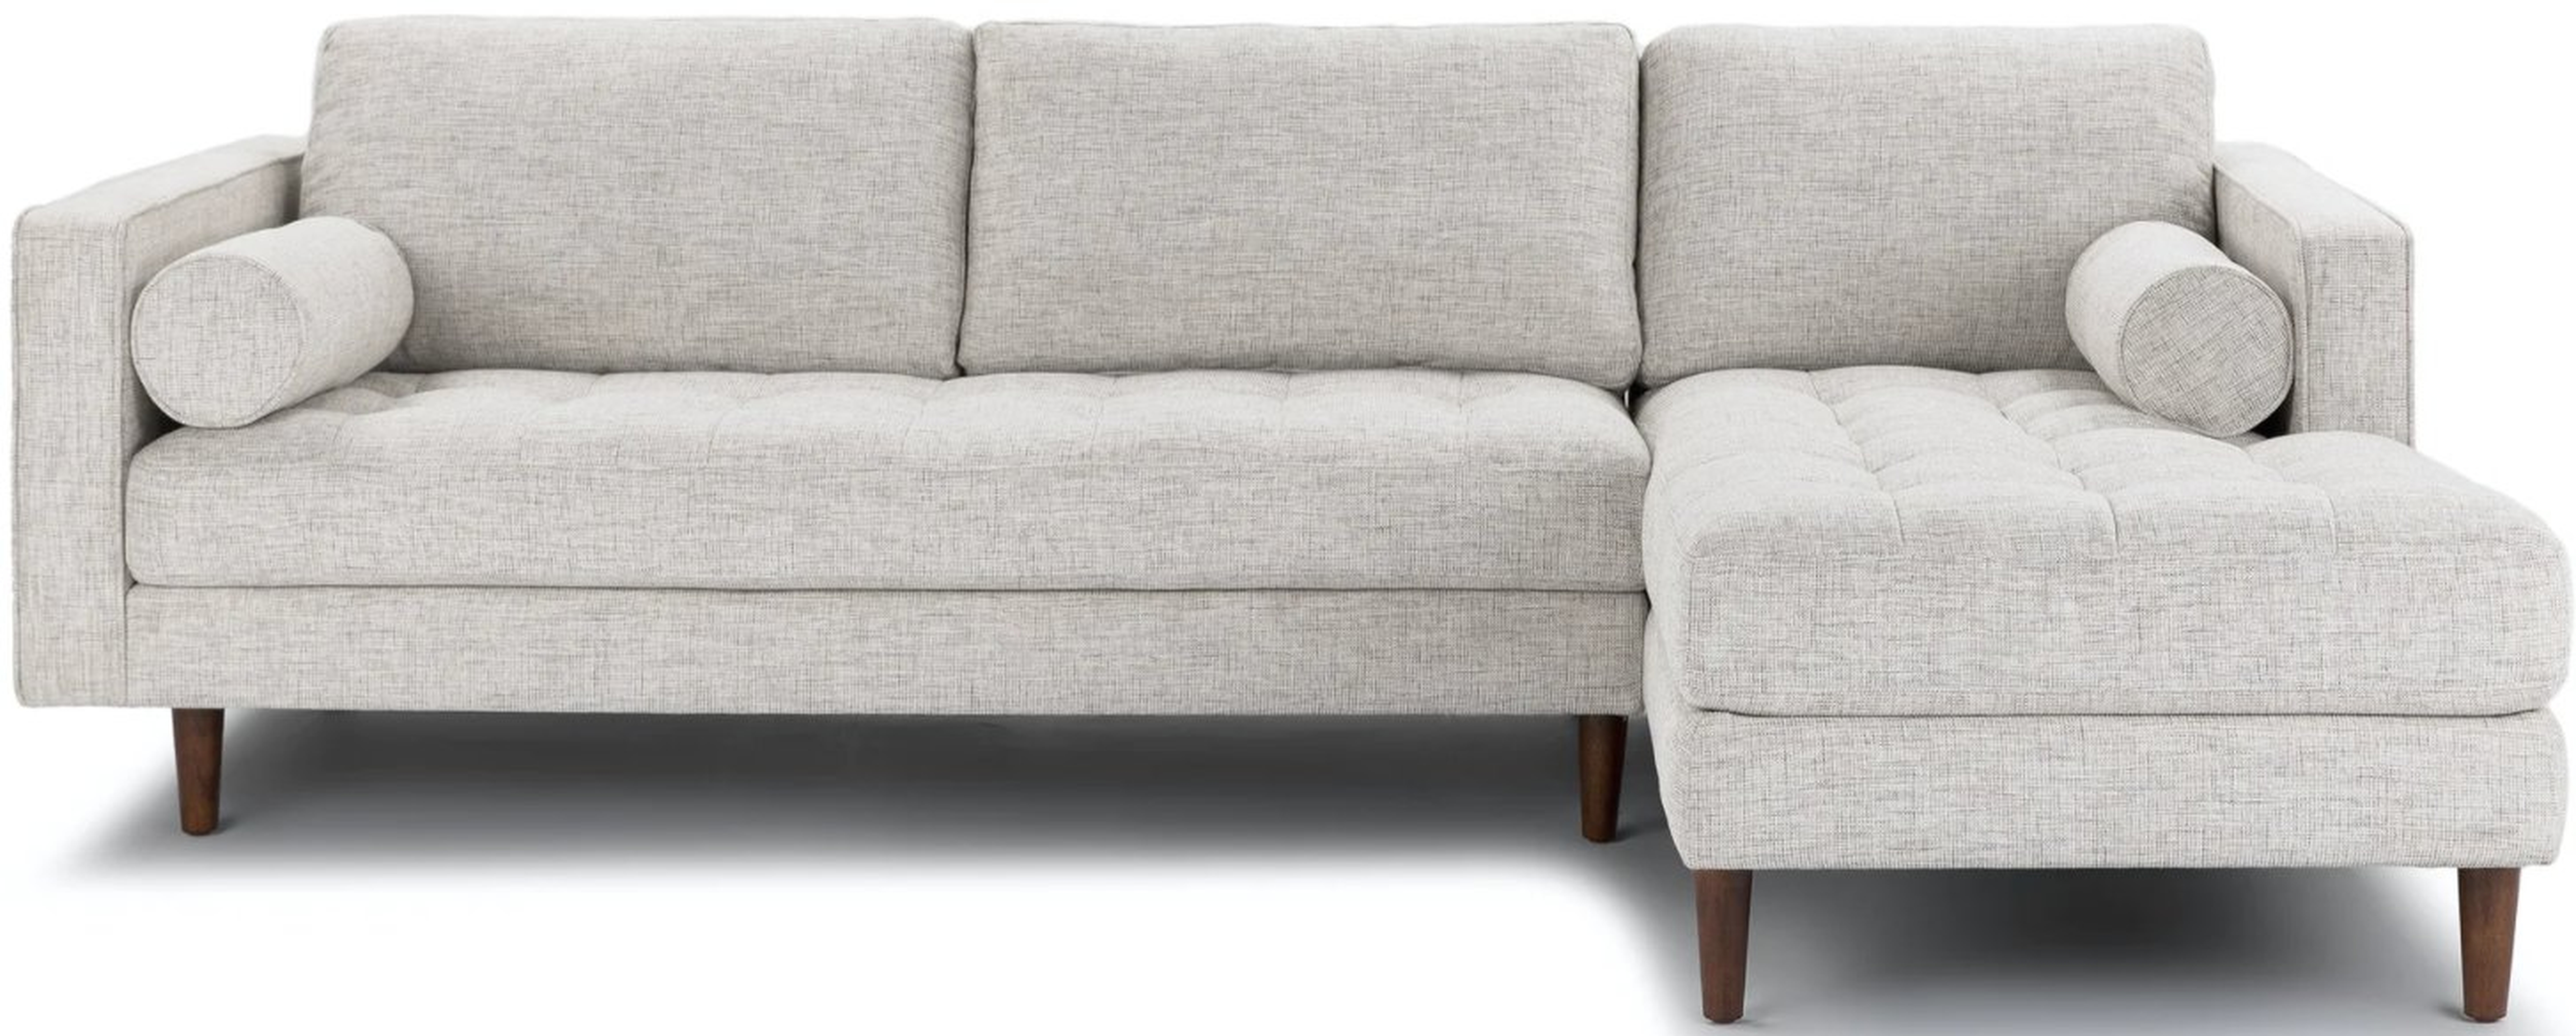 Sven Right Sectional Sofa - Article